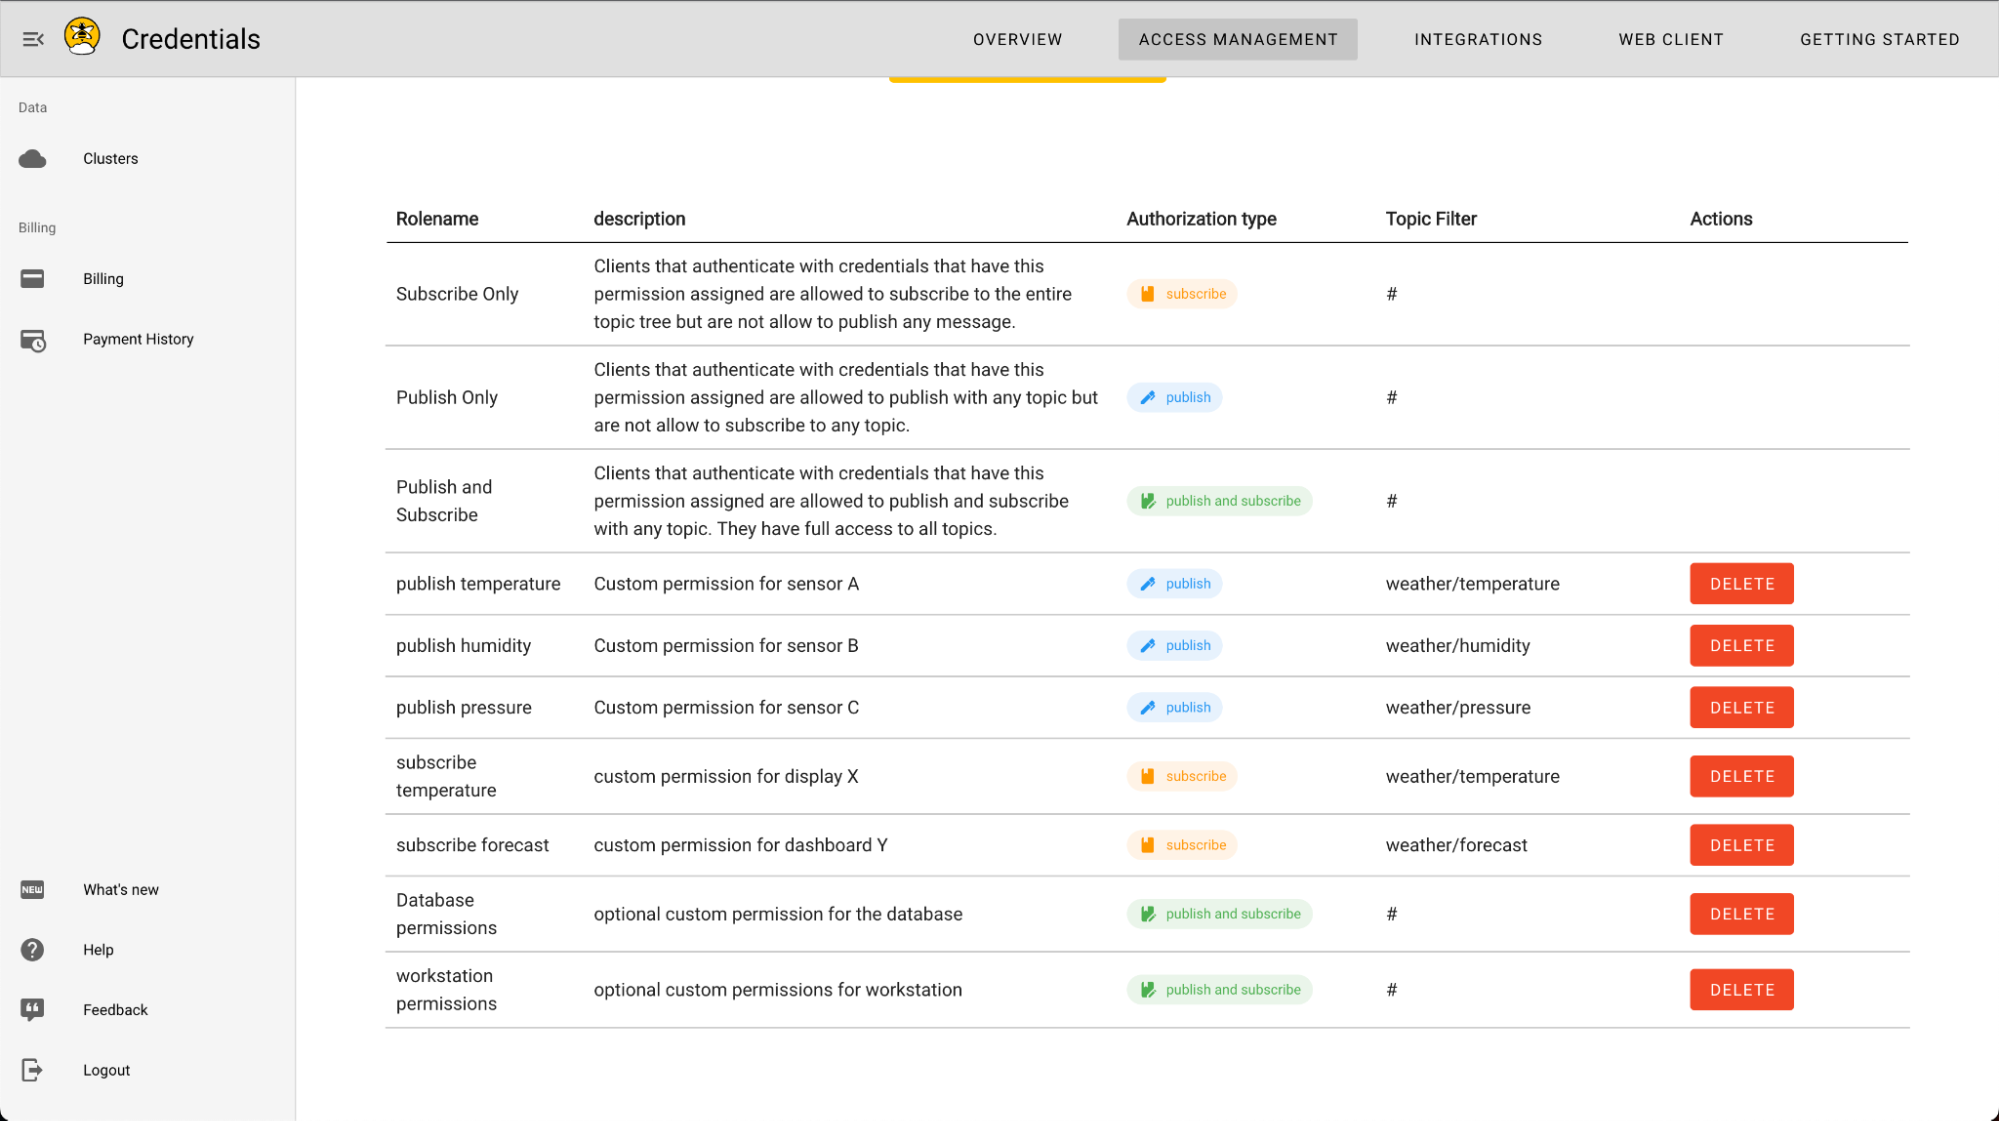 Custom Permissions for the Described Use-case as Seen in the HiveMQ Cloud UI